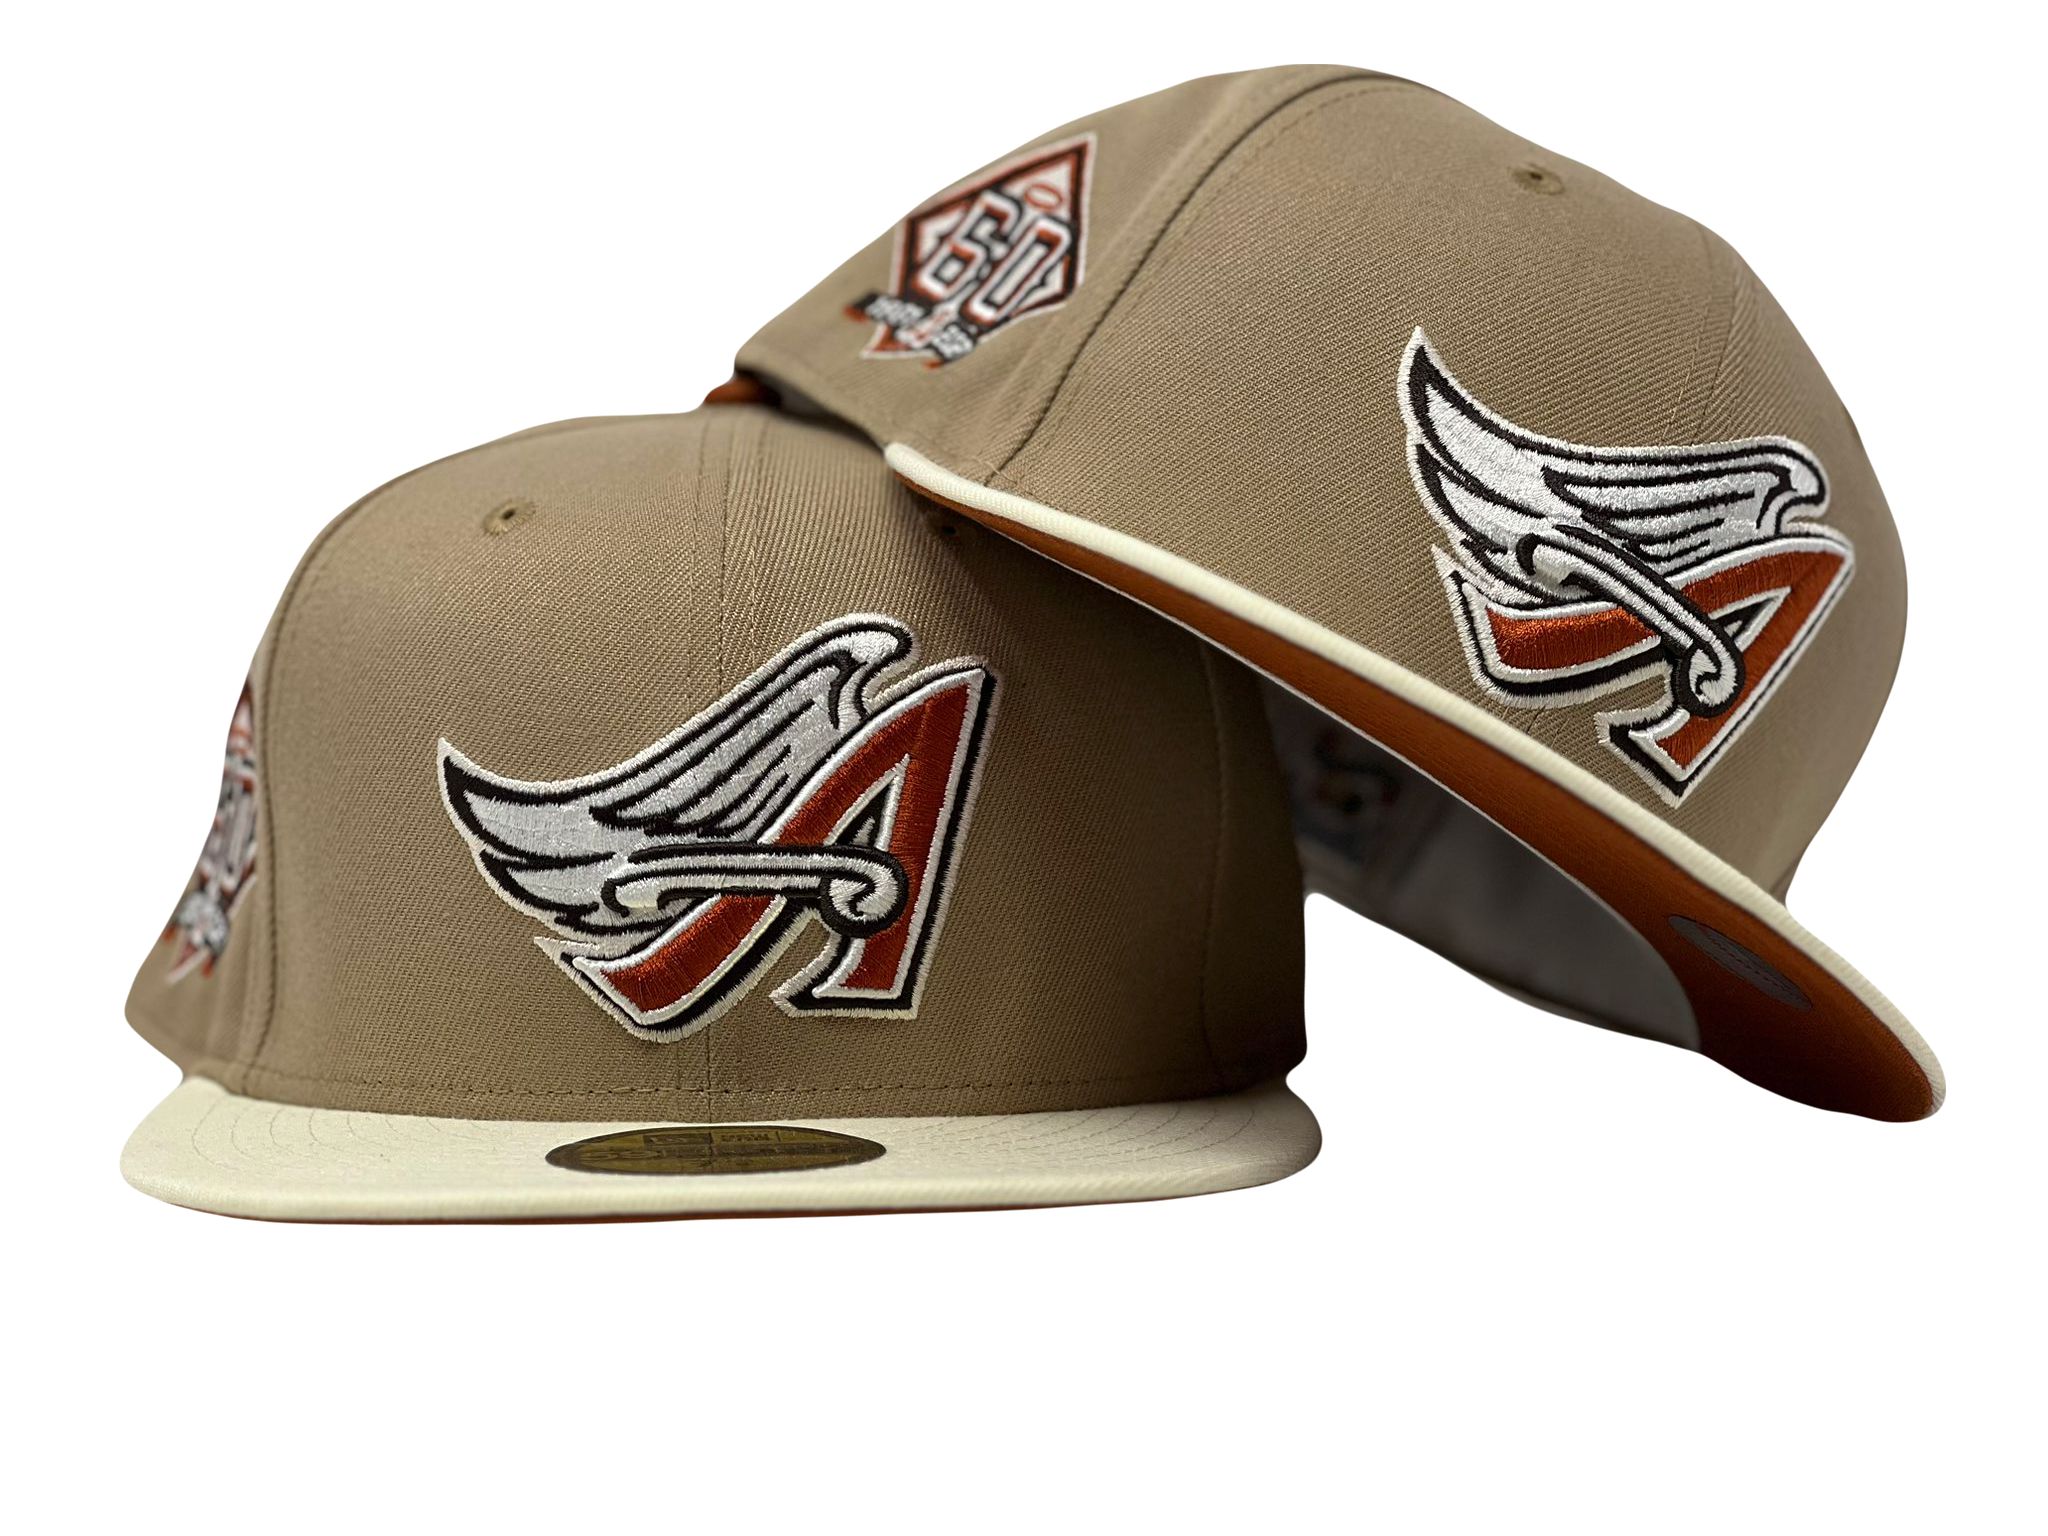 Anaheim Angels 60th Anniversary New Era 59Fifty Fitted Hat (Burnt